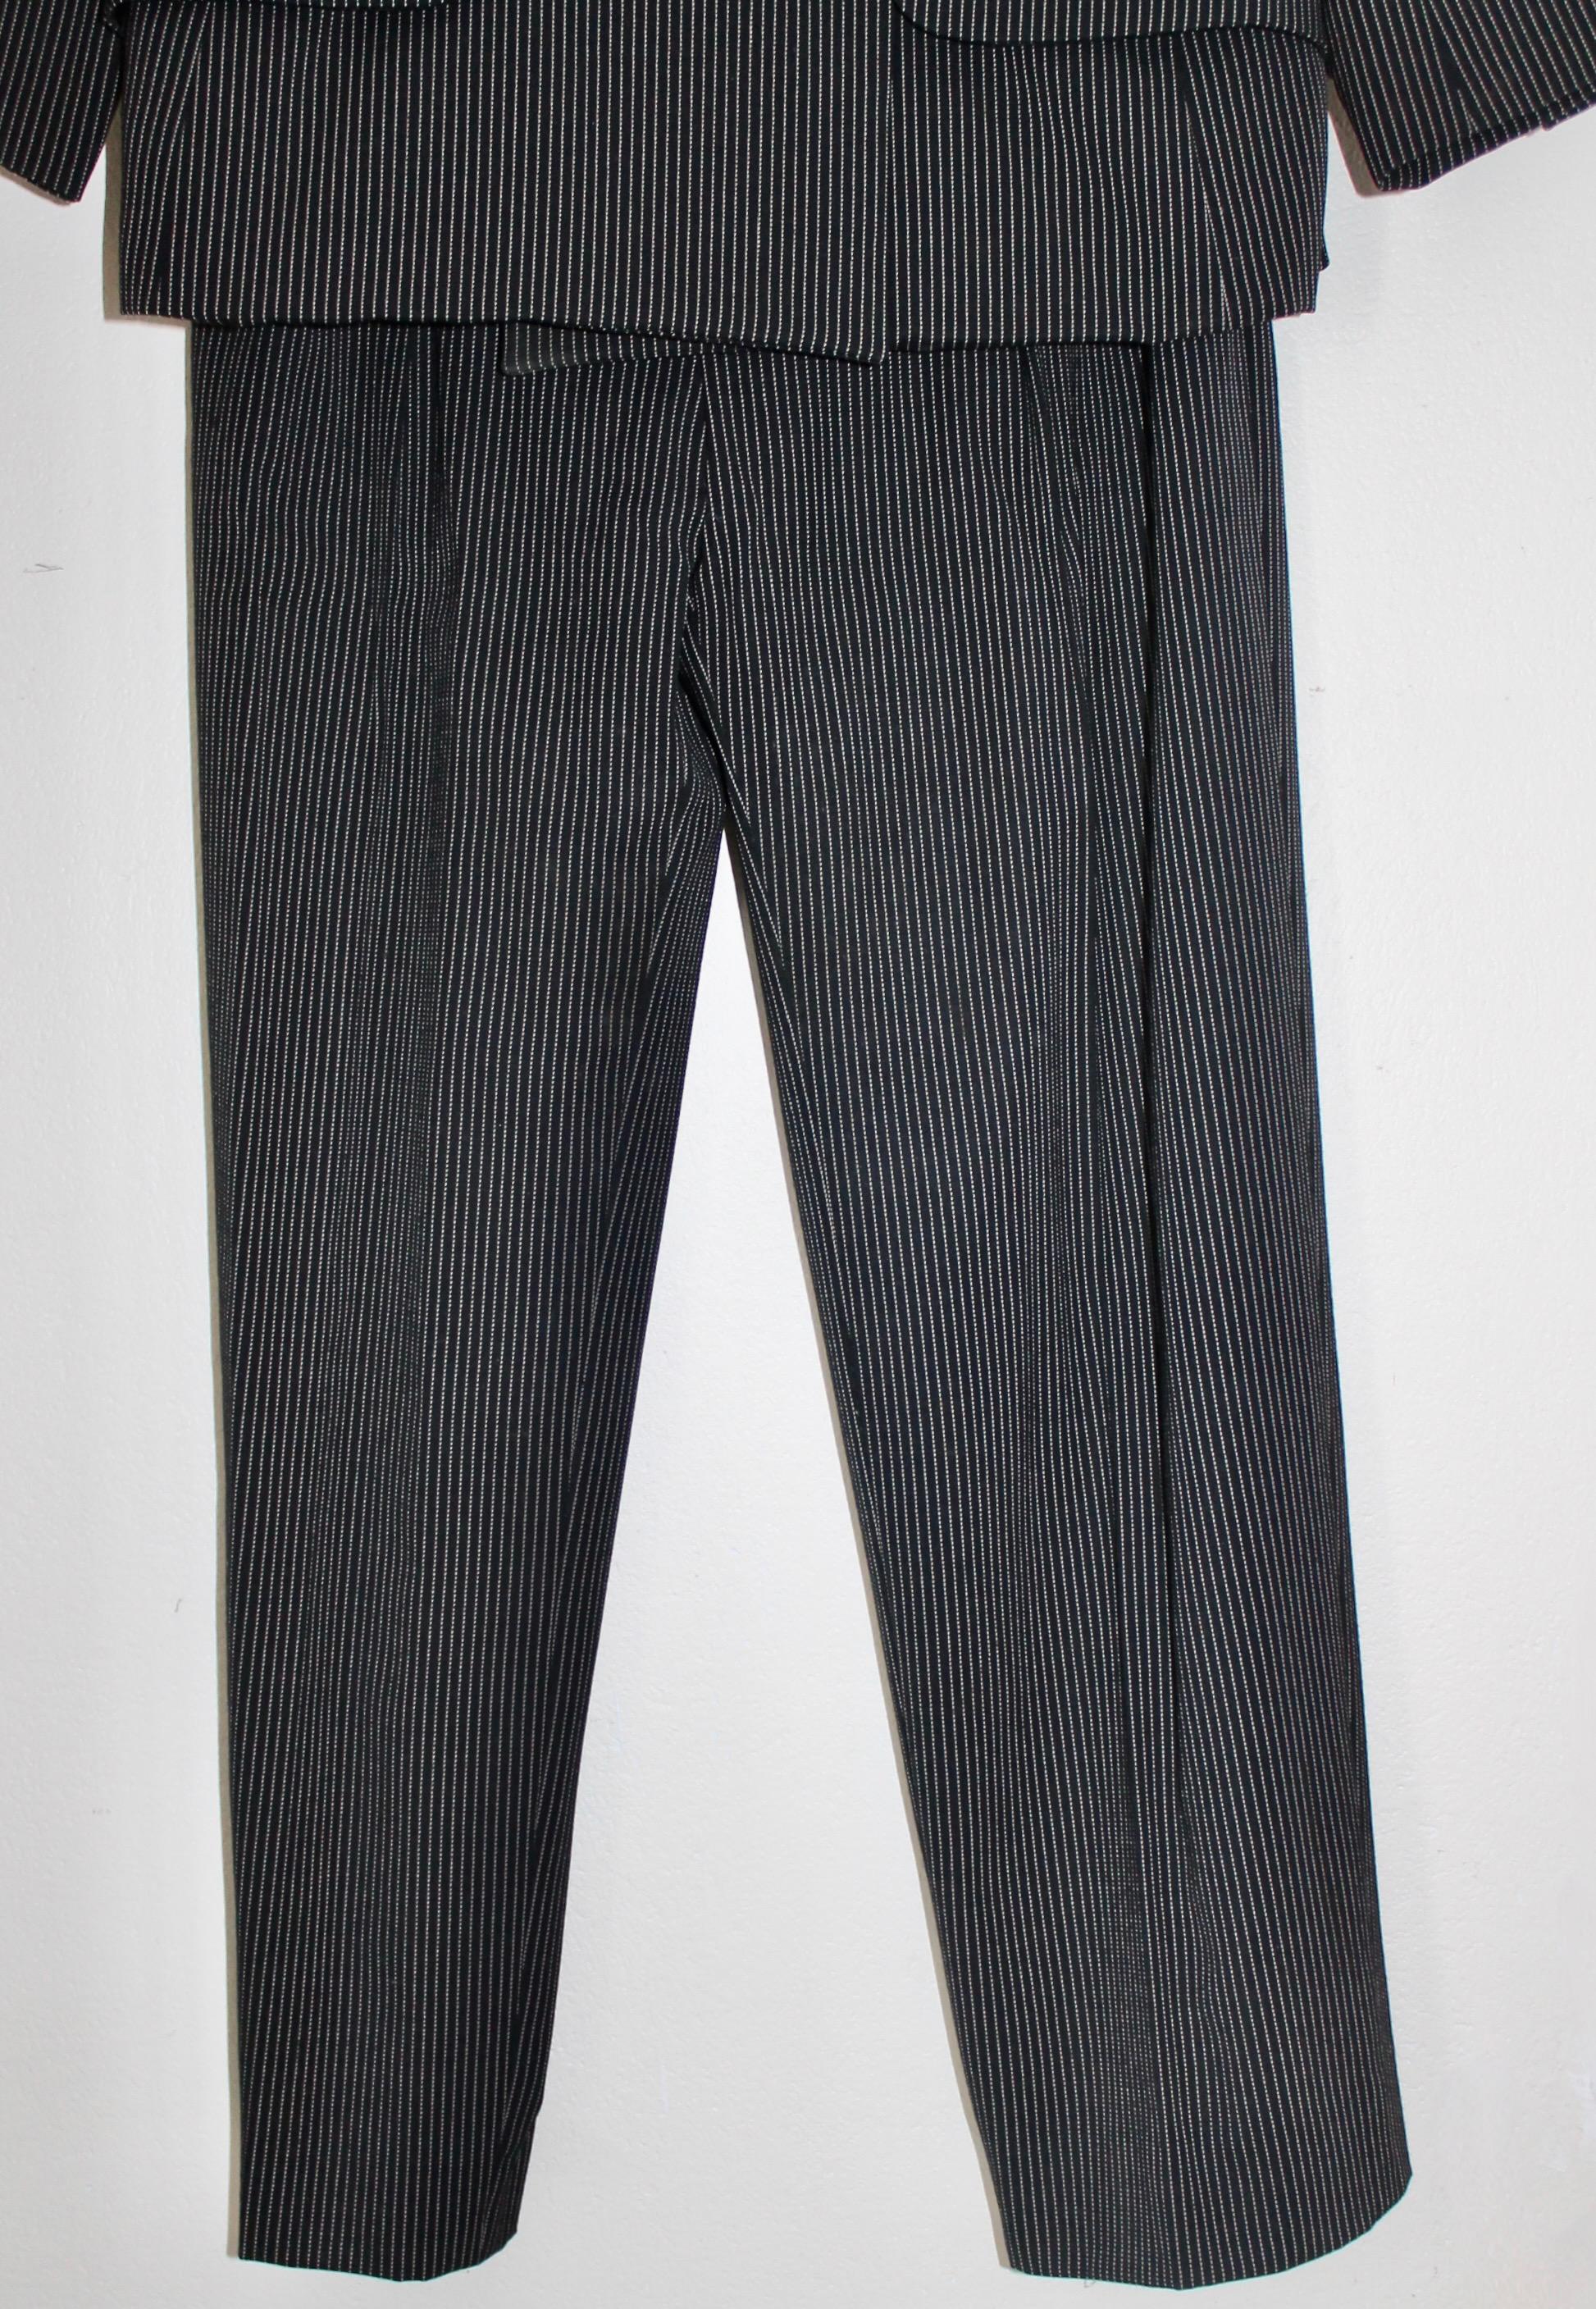 Yves Saint Laurent Rive Gauche Pin Strip Pants Suit 1980's In Good Condition For Sale In Sharon, CT